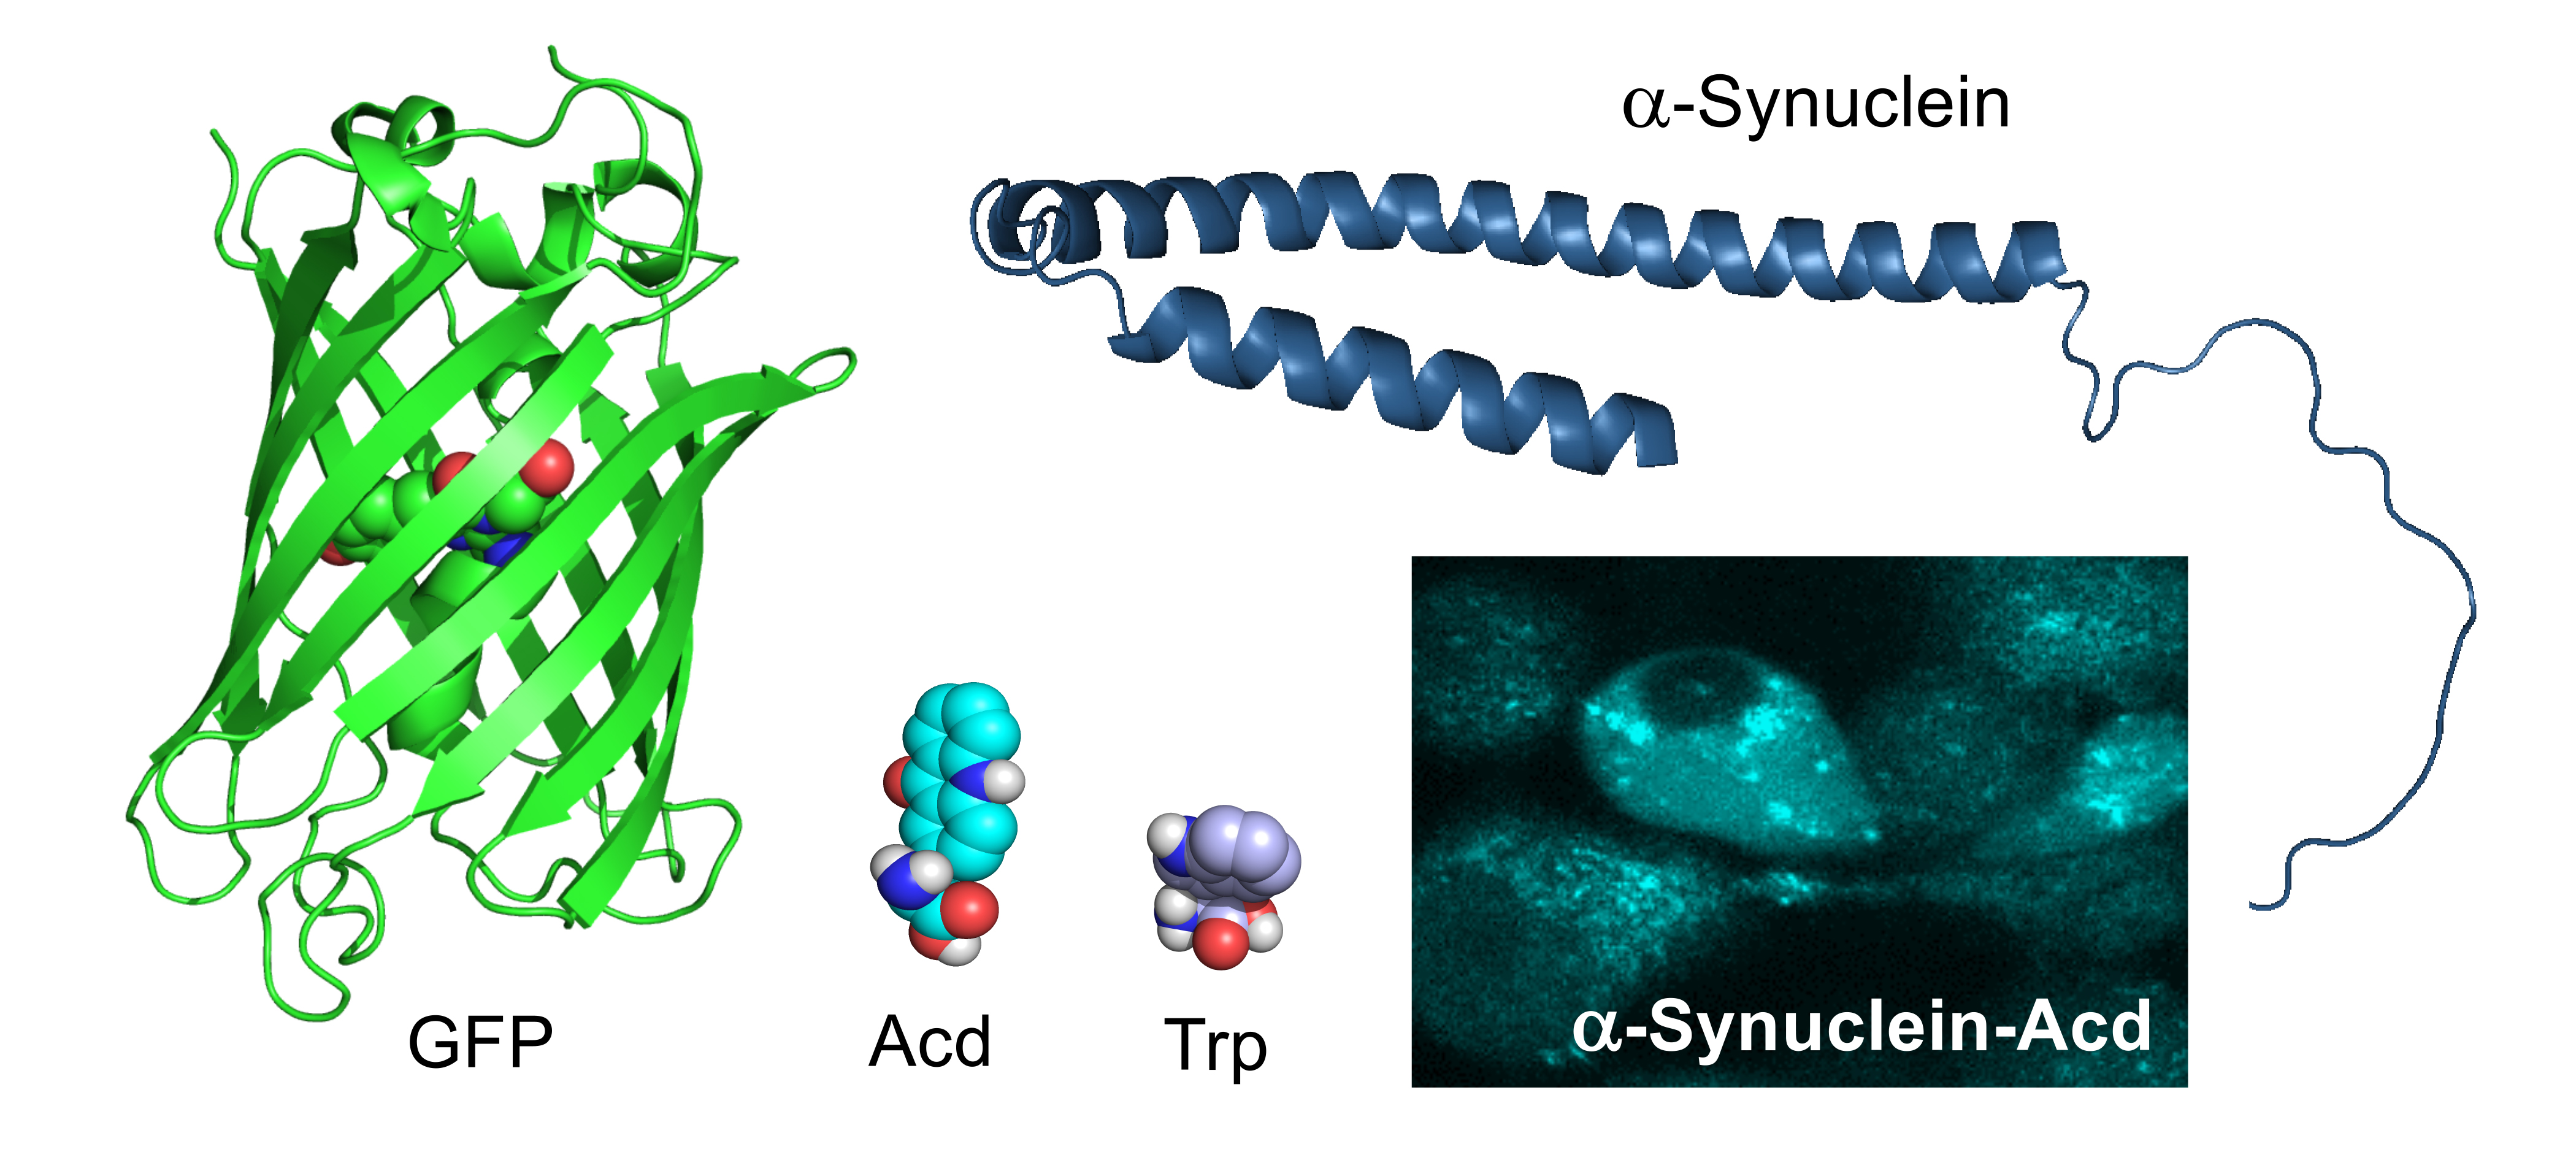 protein structures of GFP, ACD, trp, alpha-synuclein, and then an image of glowing alpha synuclein proteins inside of a cell